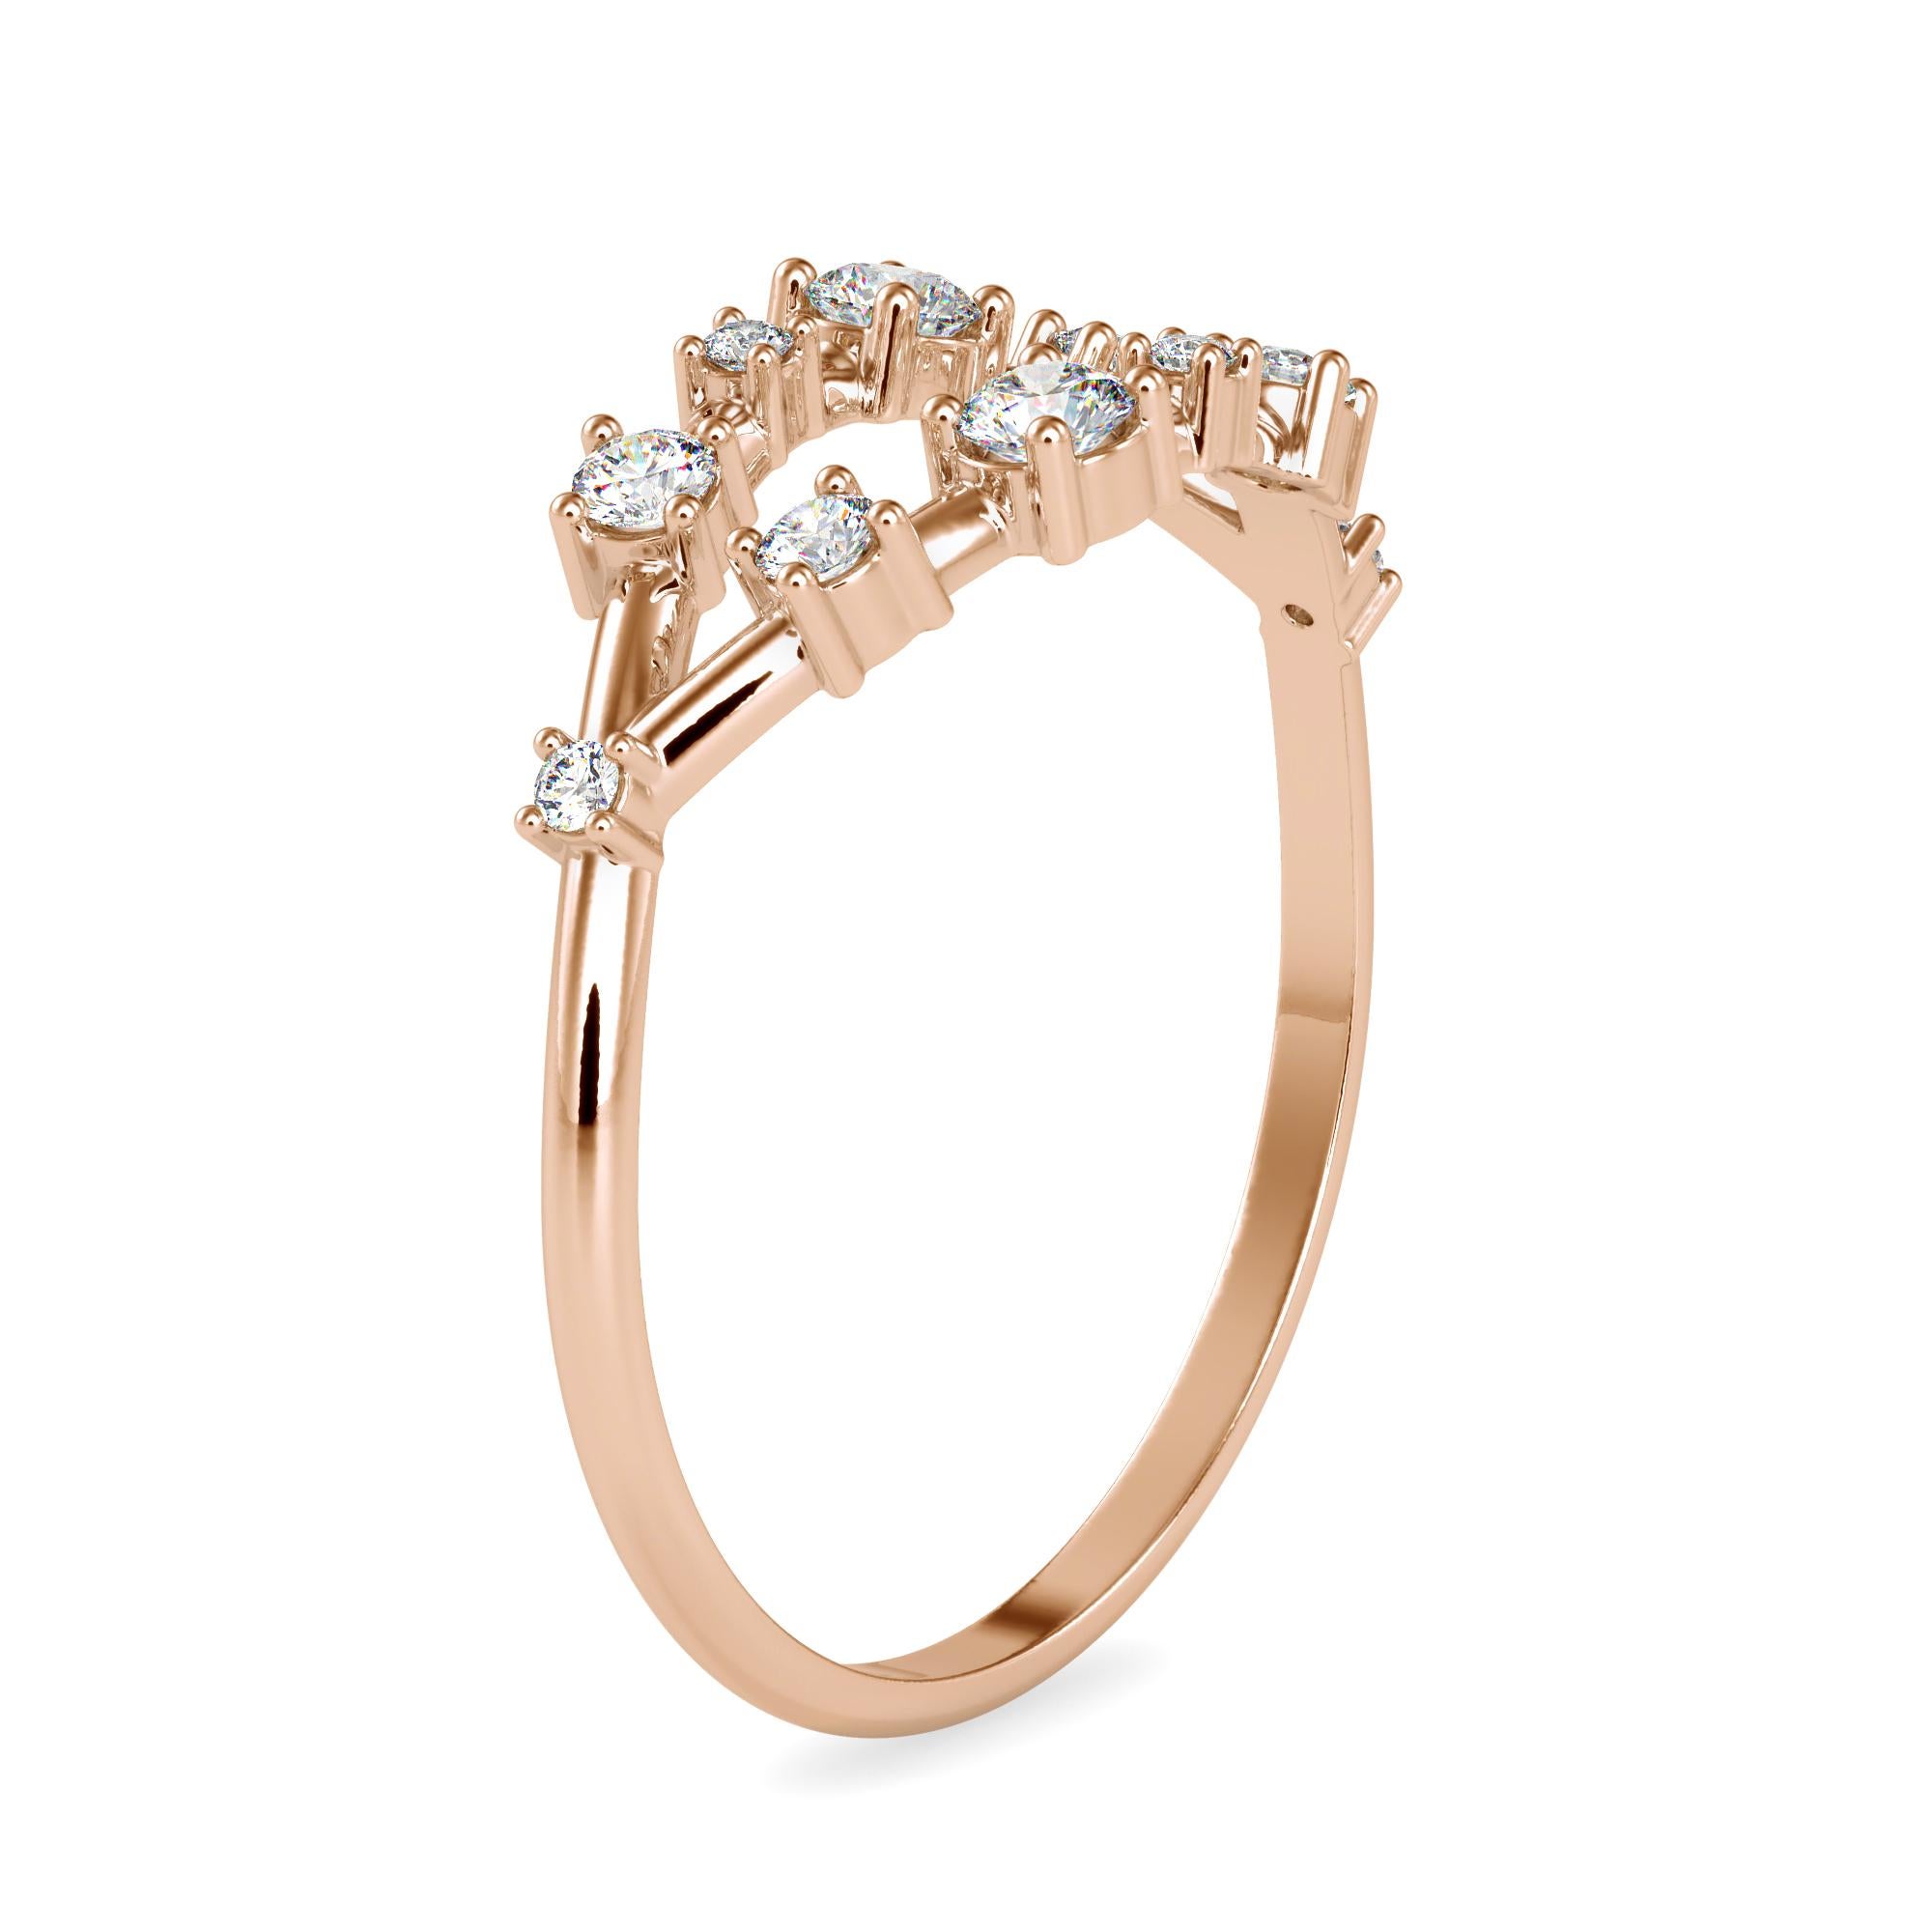 0.25 Carat Diamond 14K Rose Gold Ring In New Condition For Sale In Los Angeles, CA